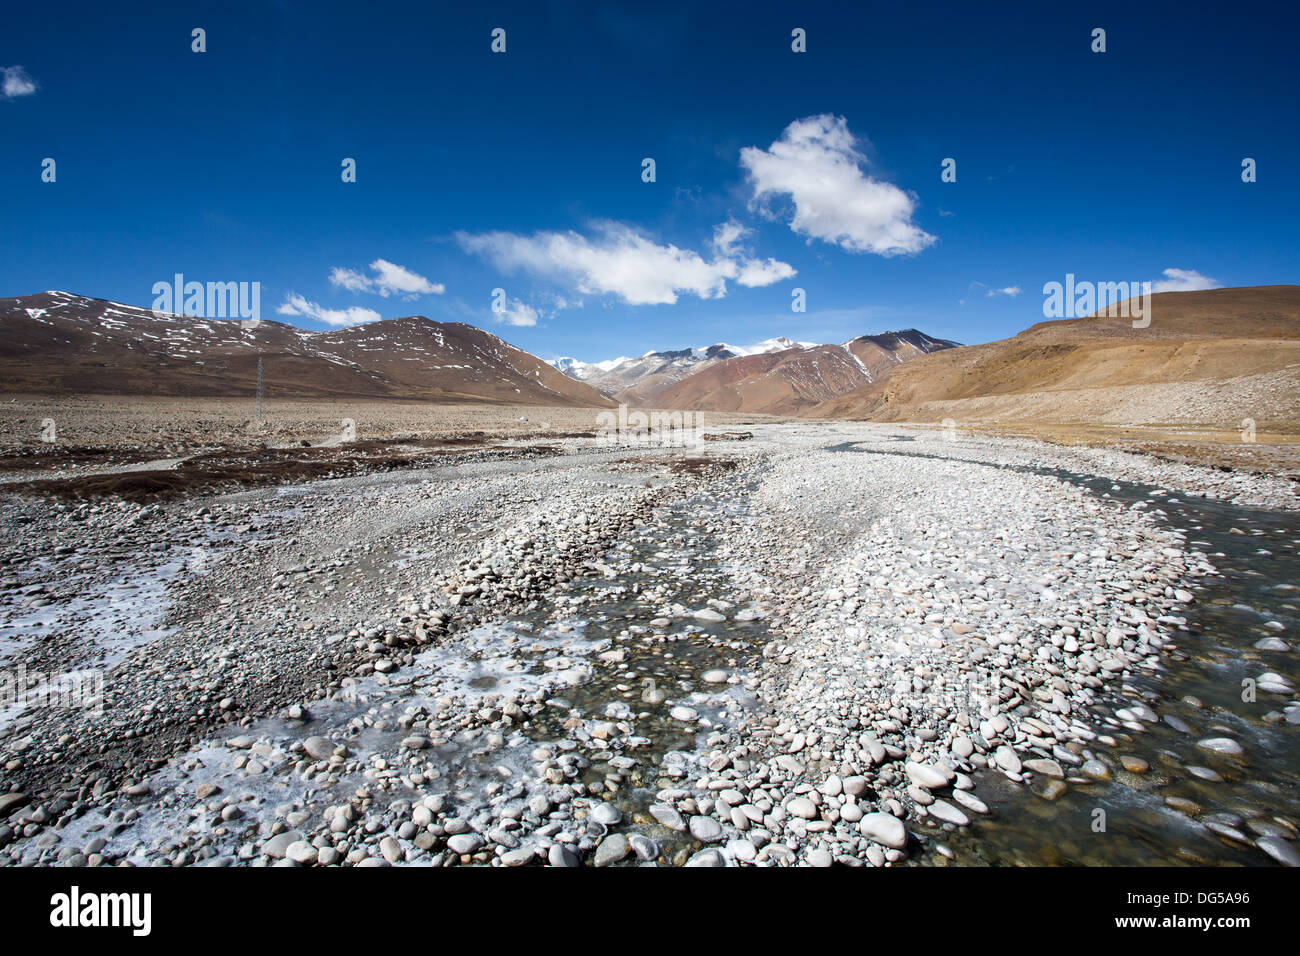 Landscape along the Friendship Highway between Tibet and Nepal Stock Photo